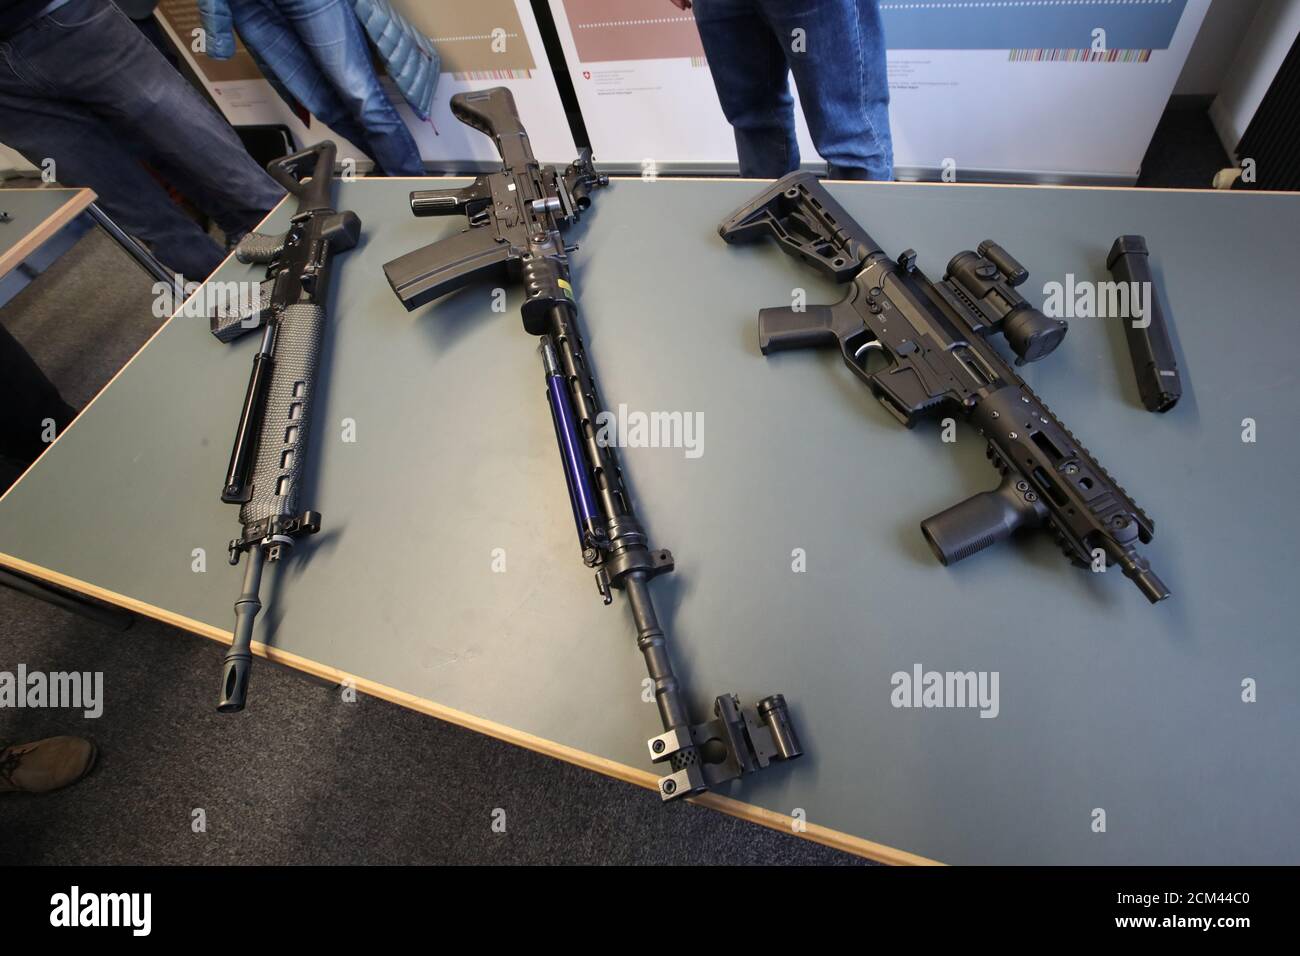 Private Fas 90 Sig Sg 550 Rifle A Sig Rifle And A Vd9 Wyssen Defence Riffle Affected By The New Proposed Gun Law Are Pictured During A Media Briefing At Fedpol In